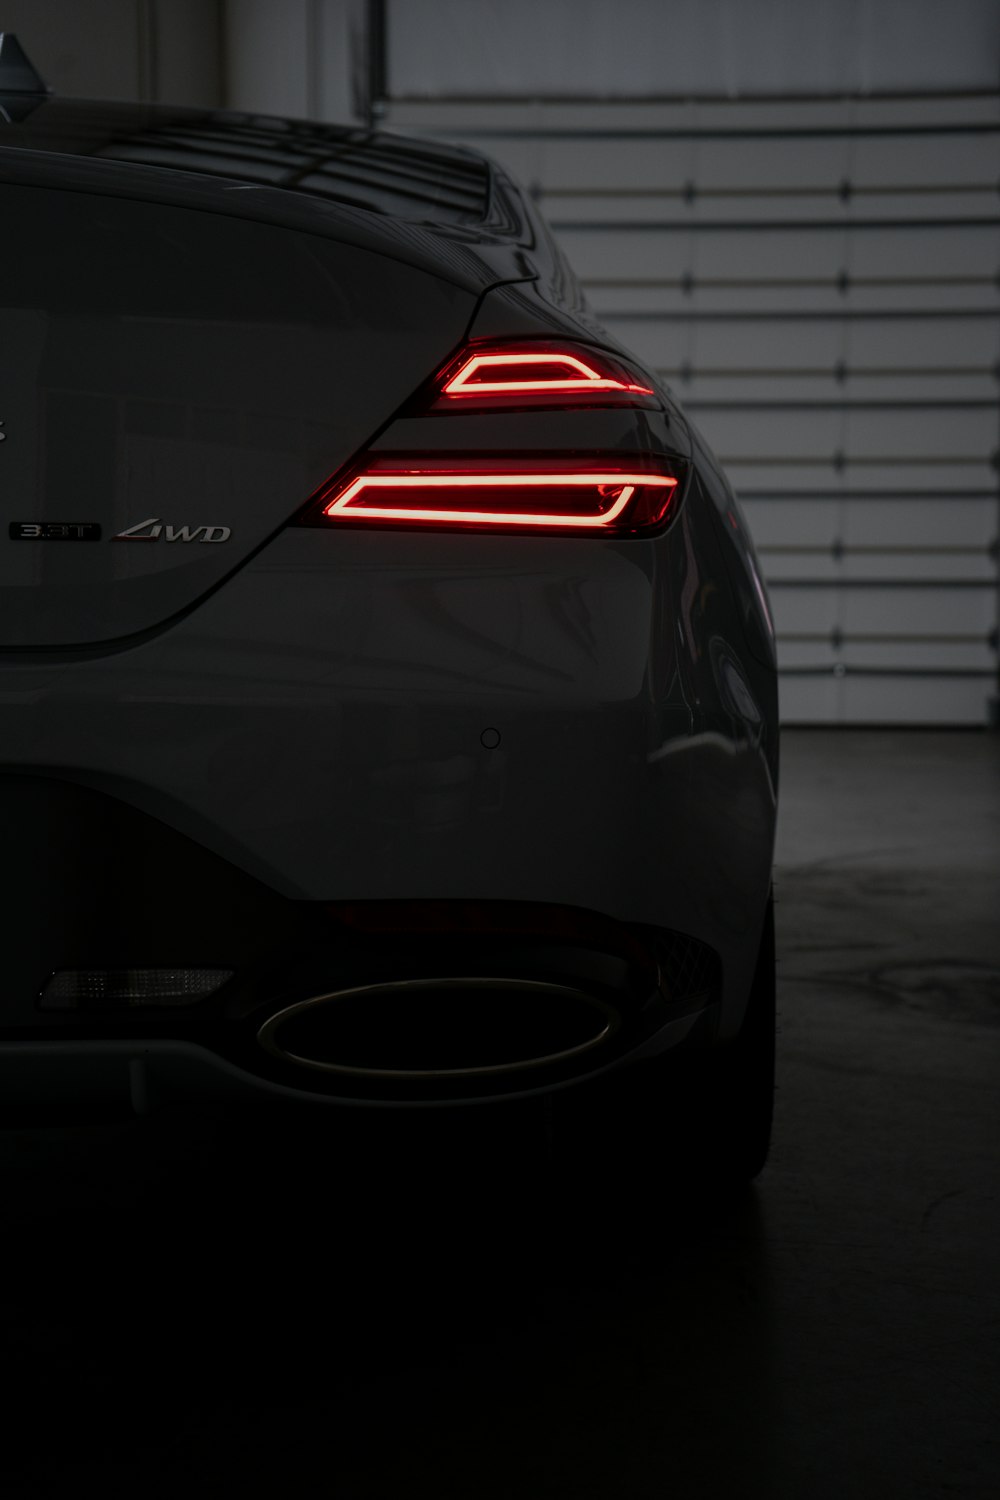 the tail lights of a car in a garage